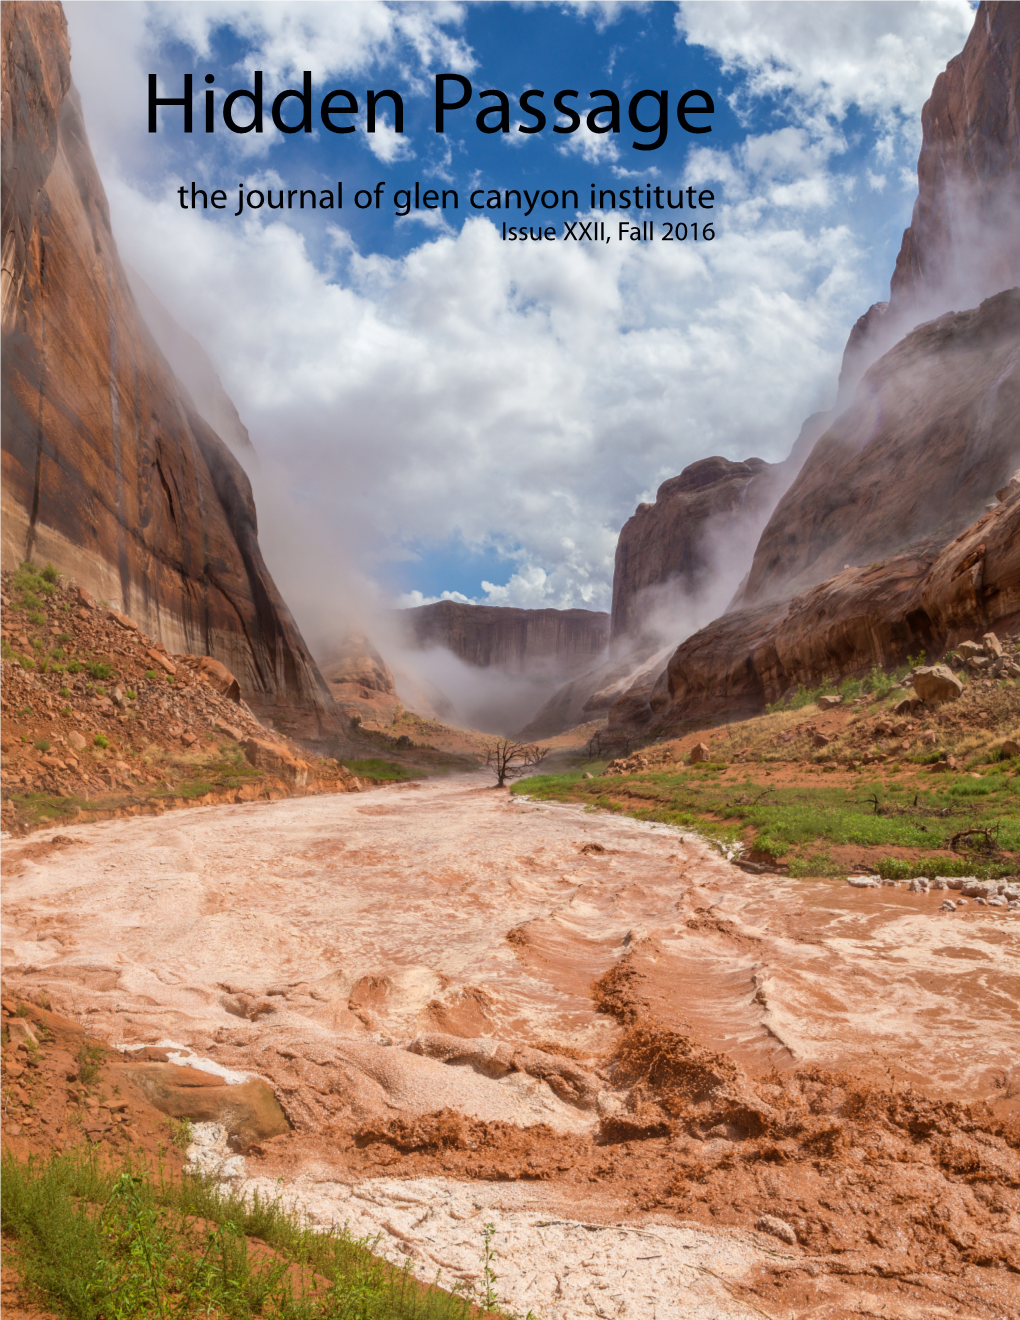 Hidden Passage the Journal of Glen Canyon Institute Issue XXII, Fall 2016 Reflecting on 20 Years of Glen Canyon Institute